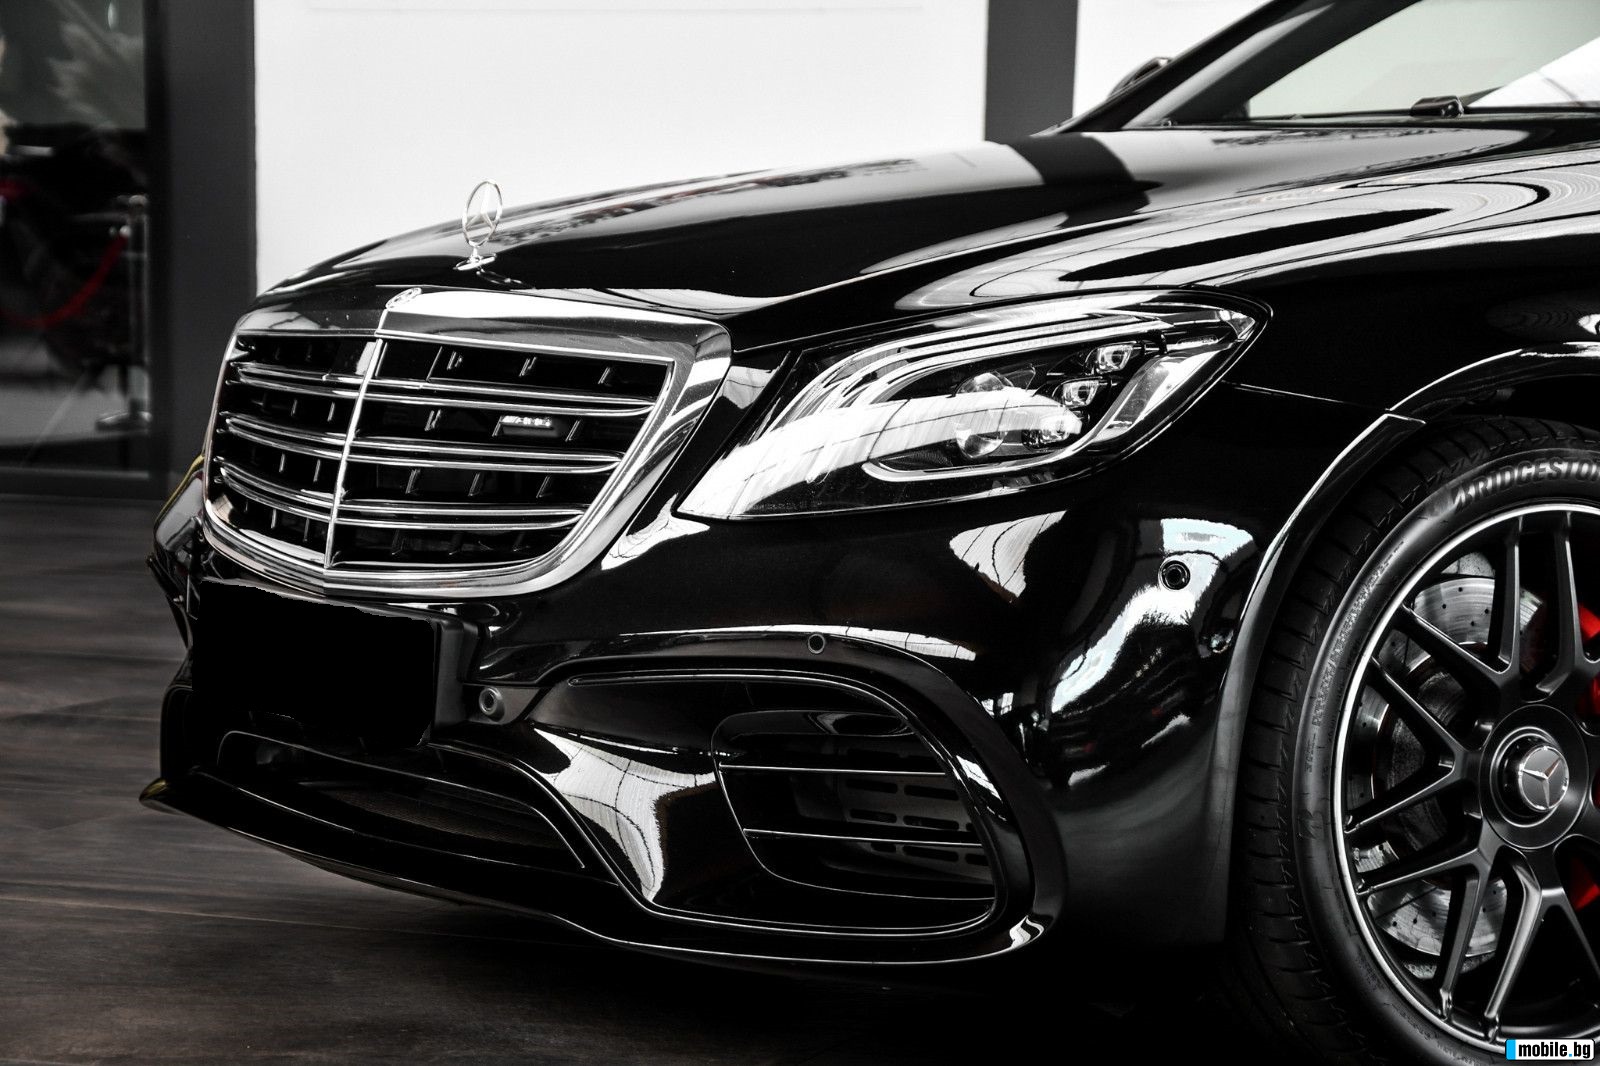 Mercedes-Benz S 63 AMG 4M+*LONG*EXCLUSIVE*PANO*NIGHT* | Mobile.bg   4